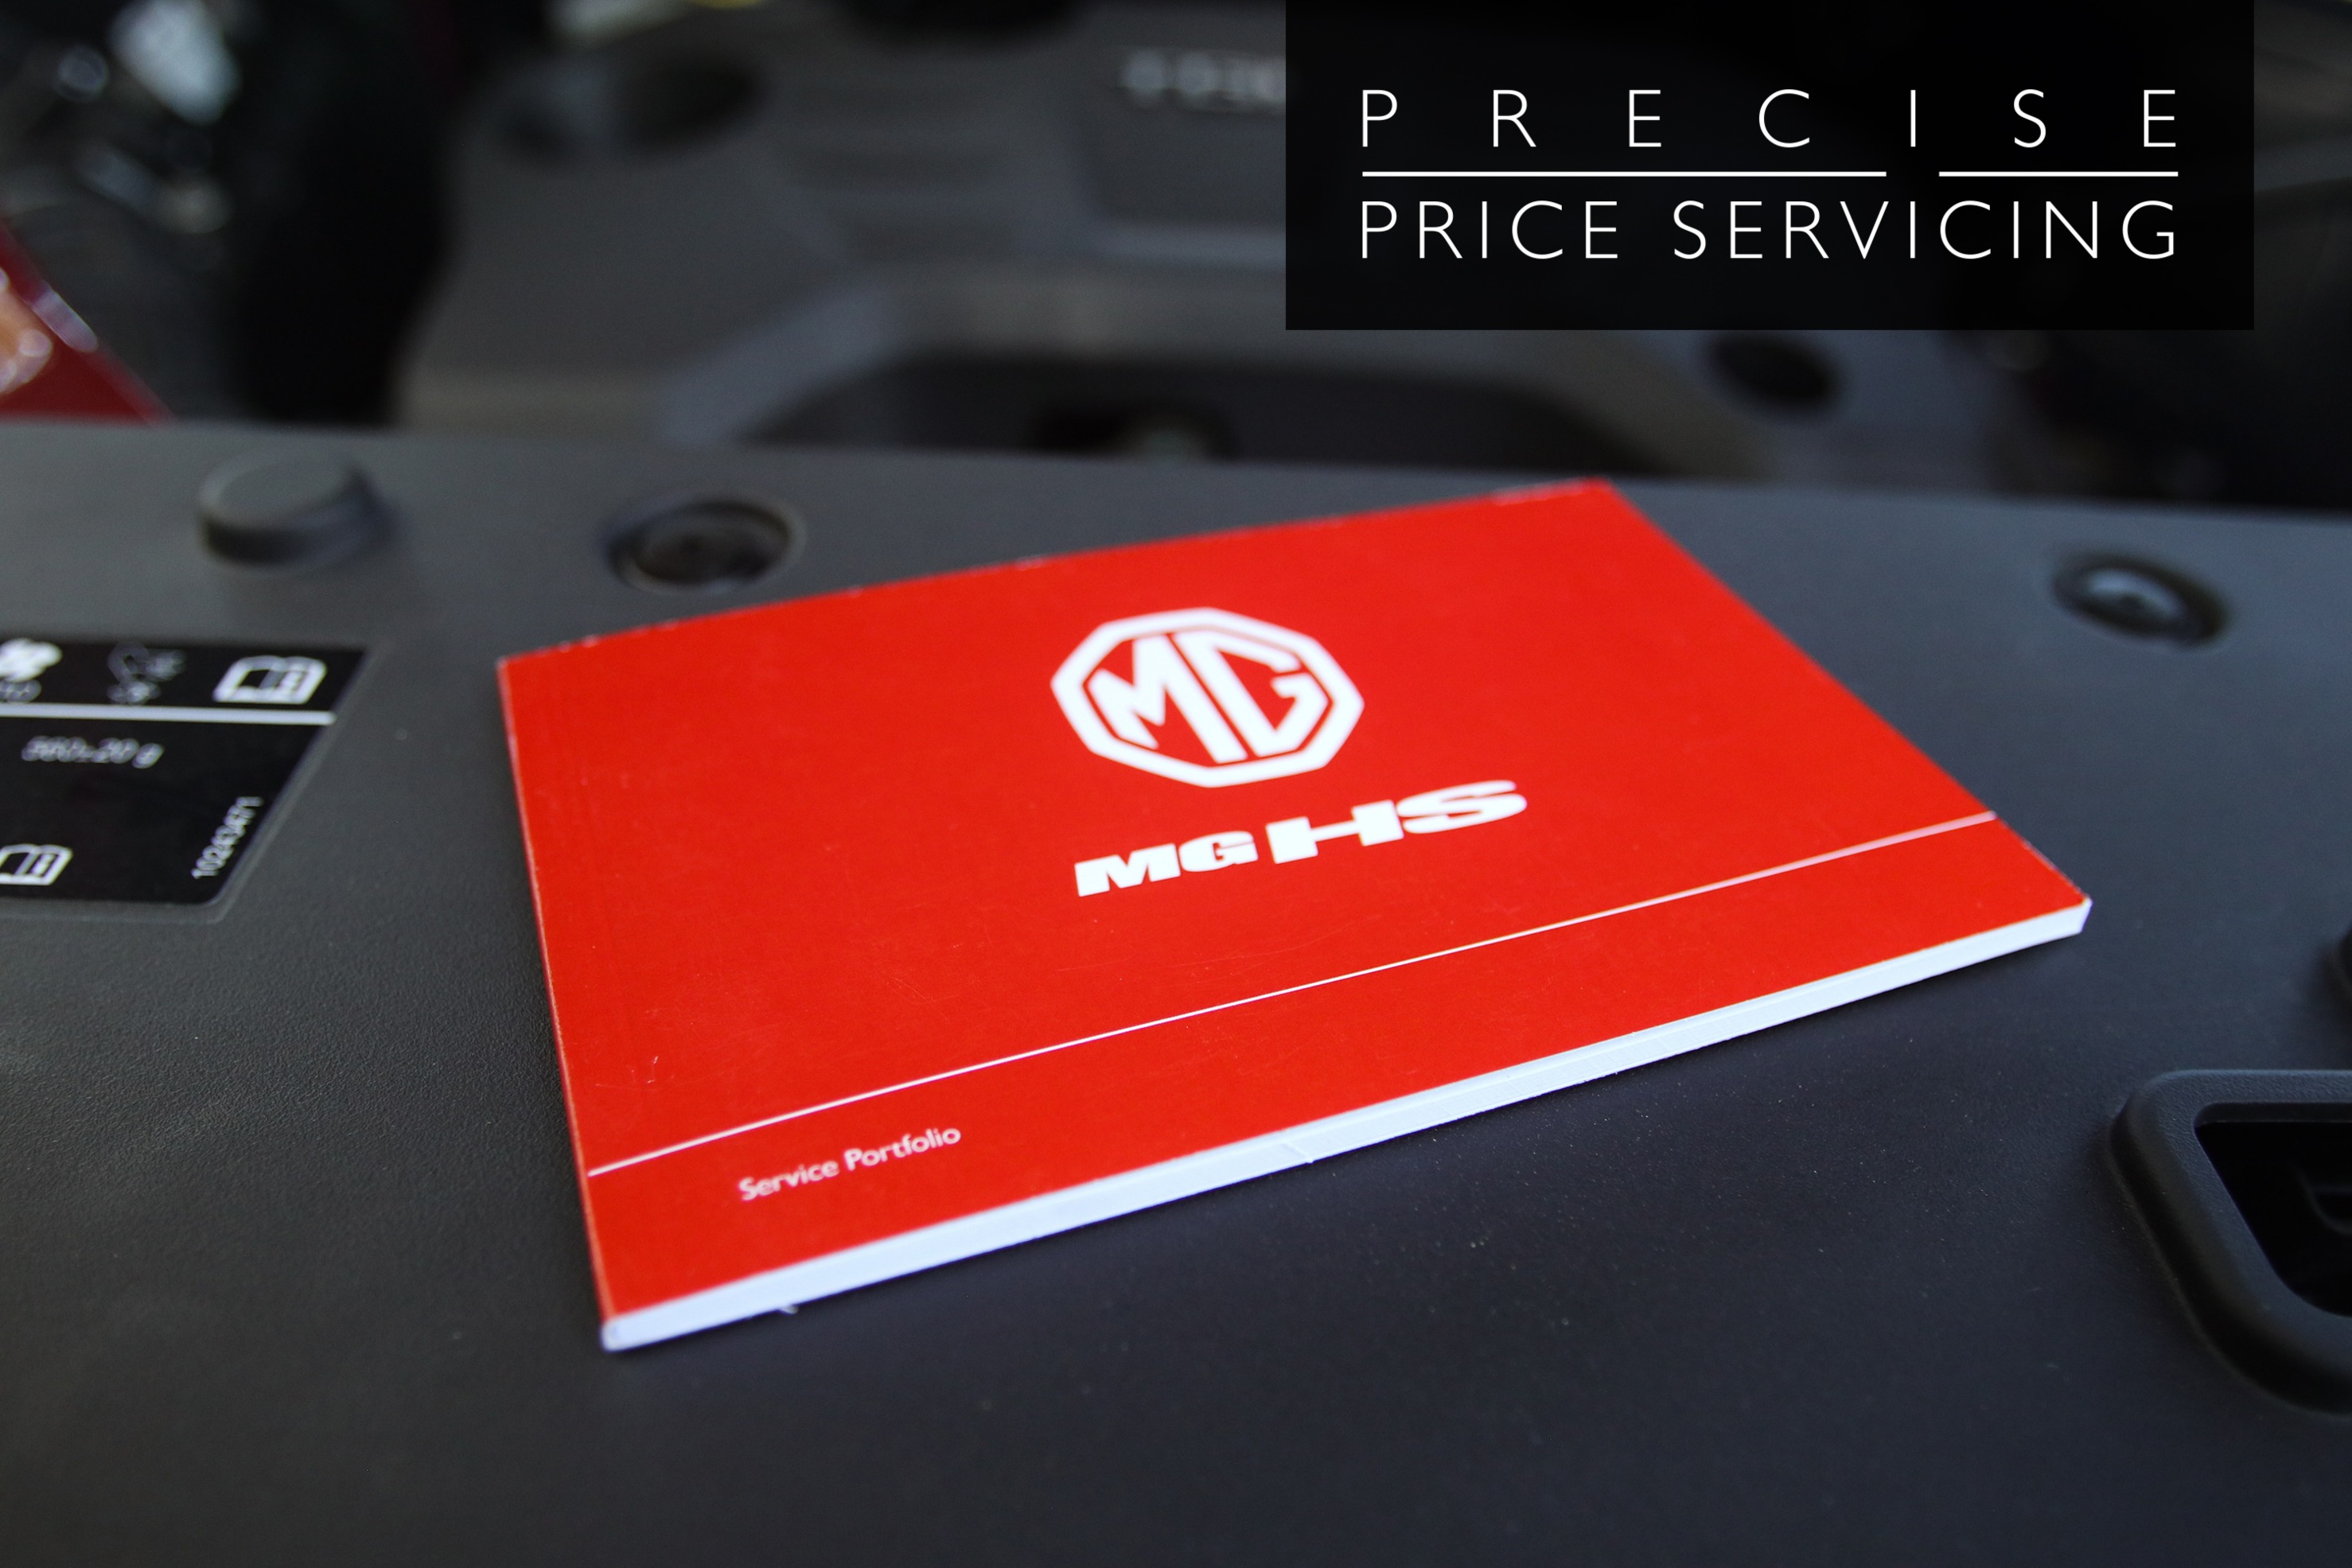 Get peace of mind with Precise Price Servicing